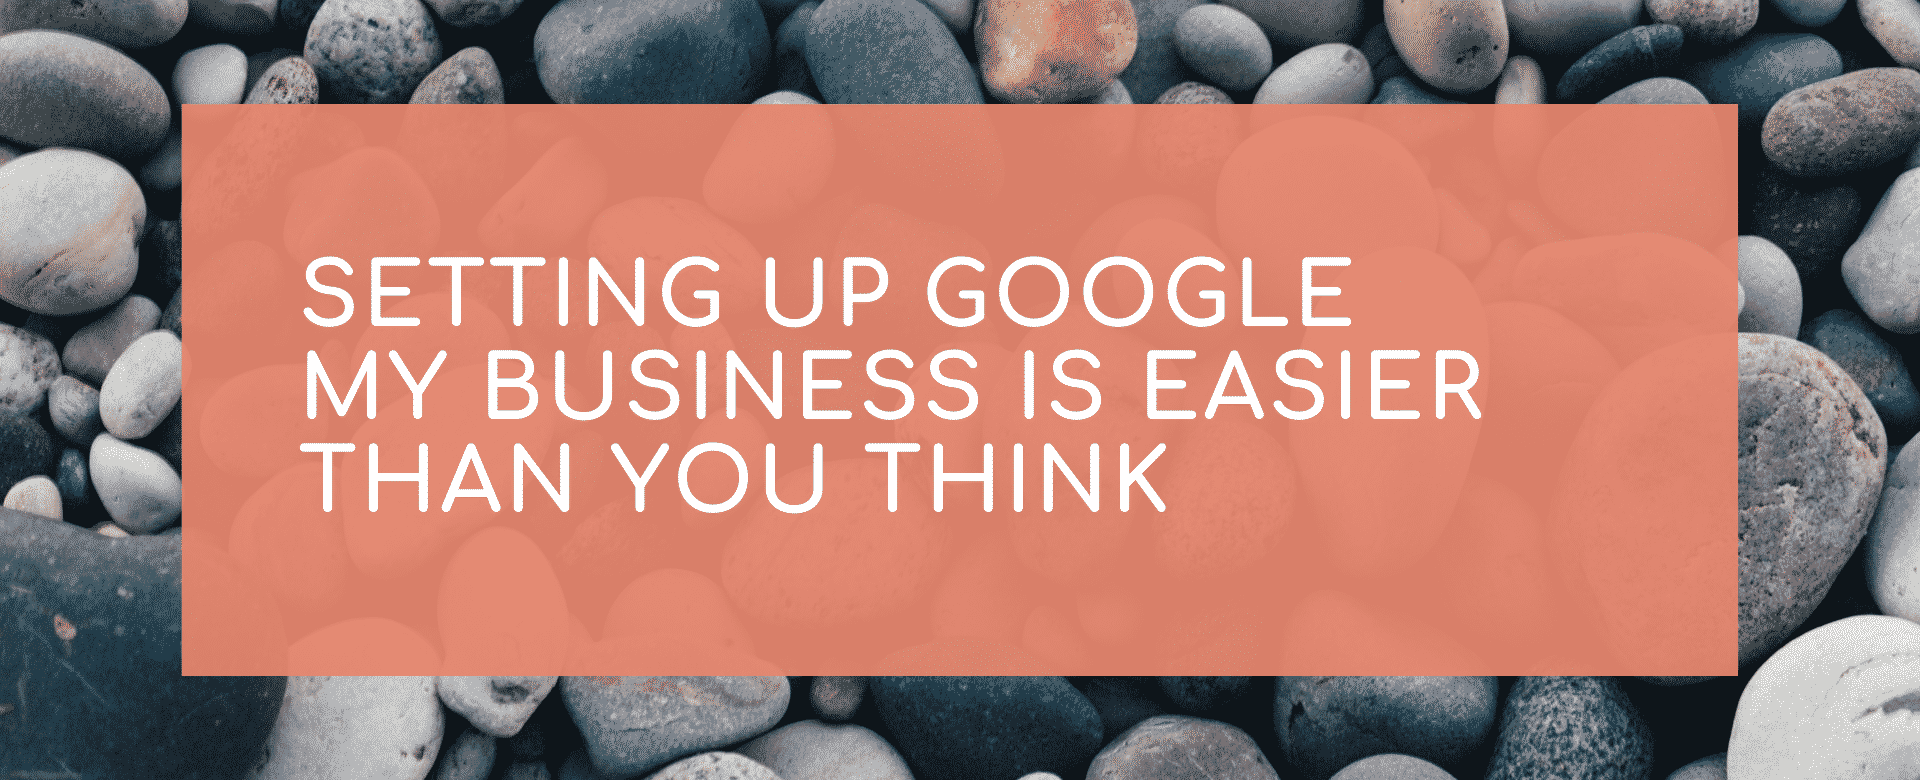 Setting up Google My Business is easier than you think 1